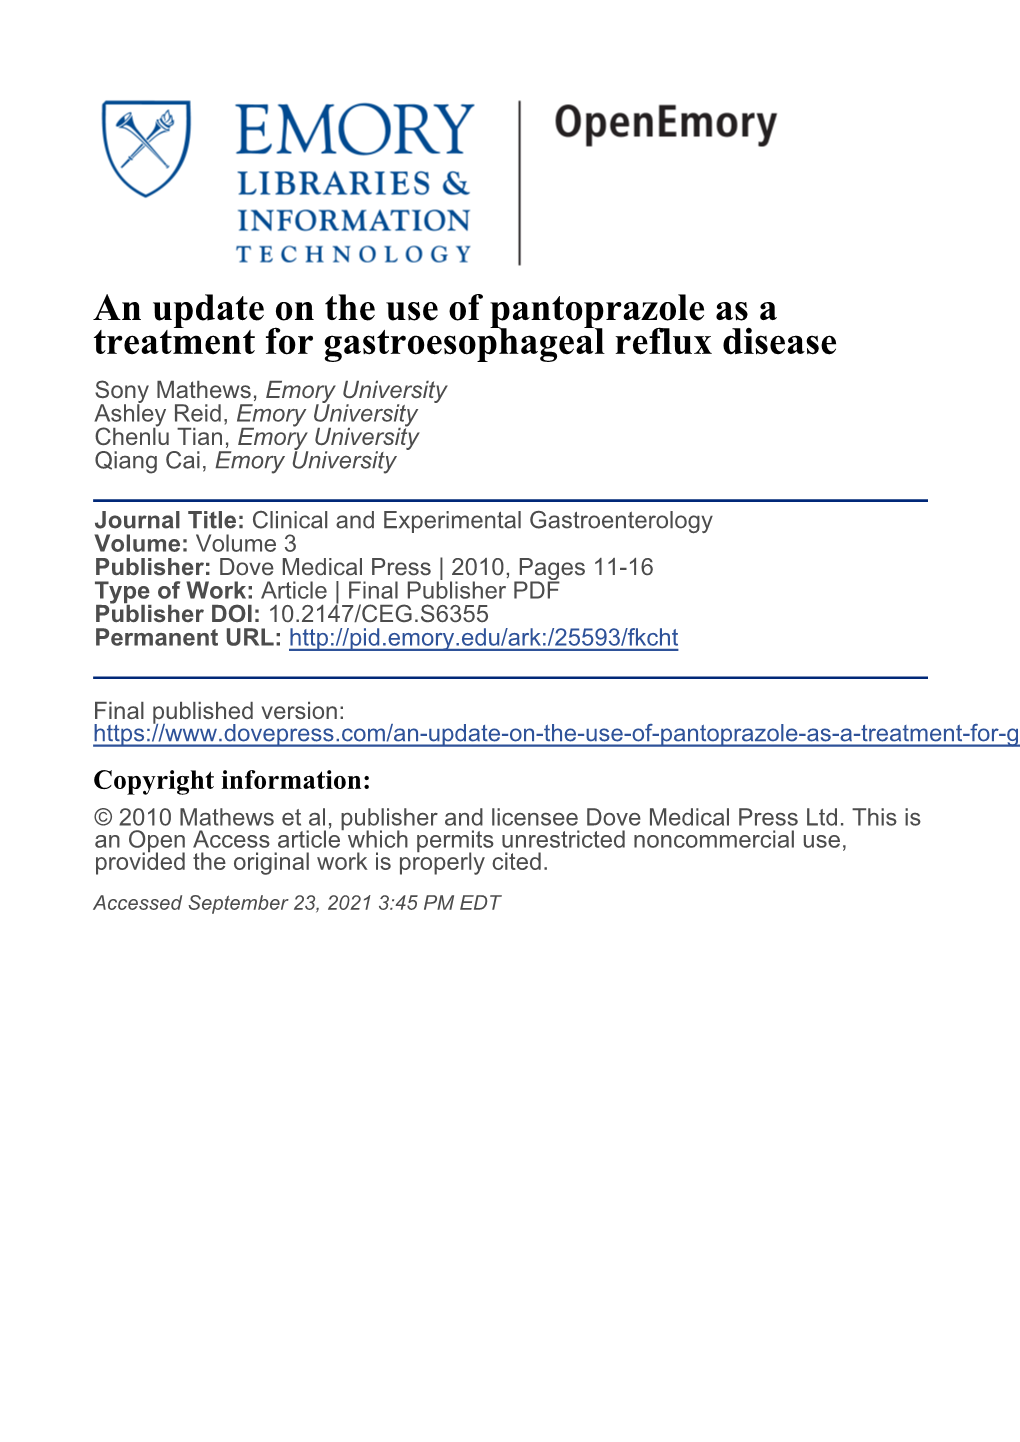 An Update on the Use of Pantoprazole As a Treatment For